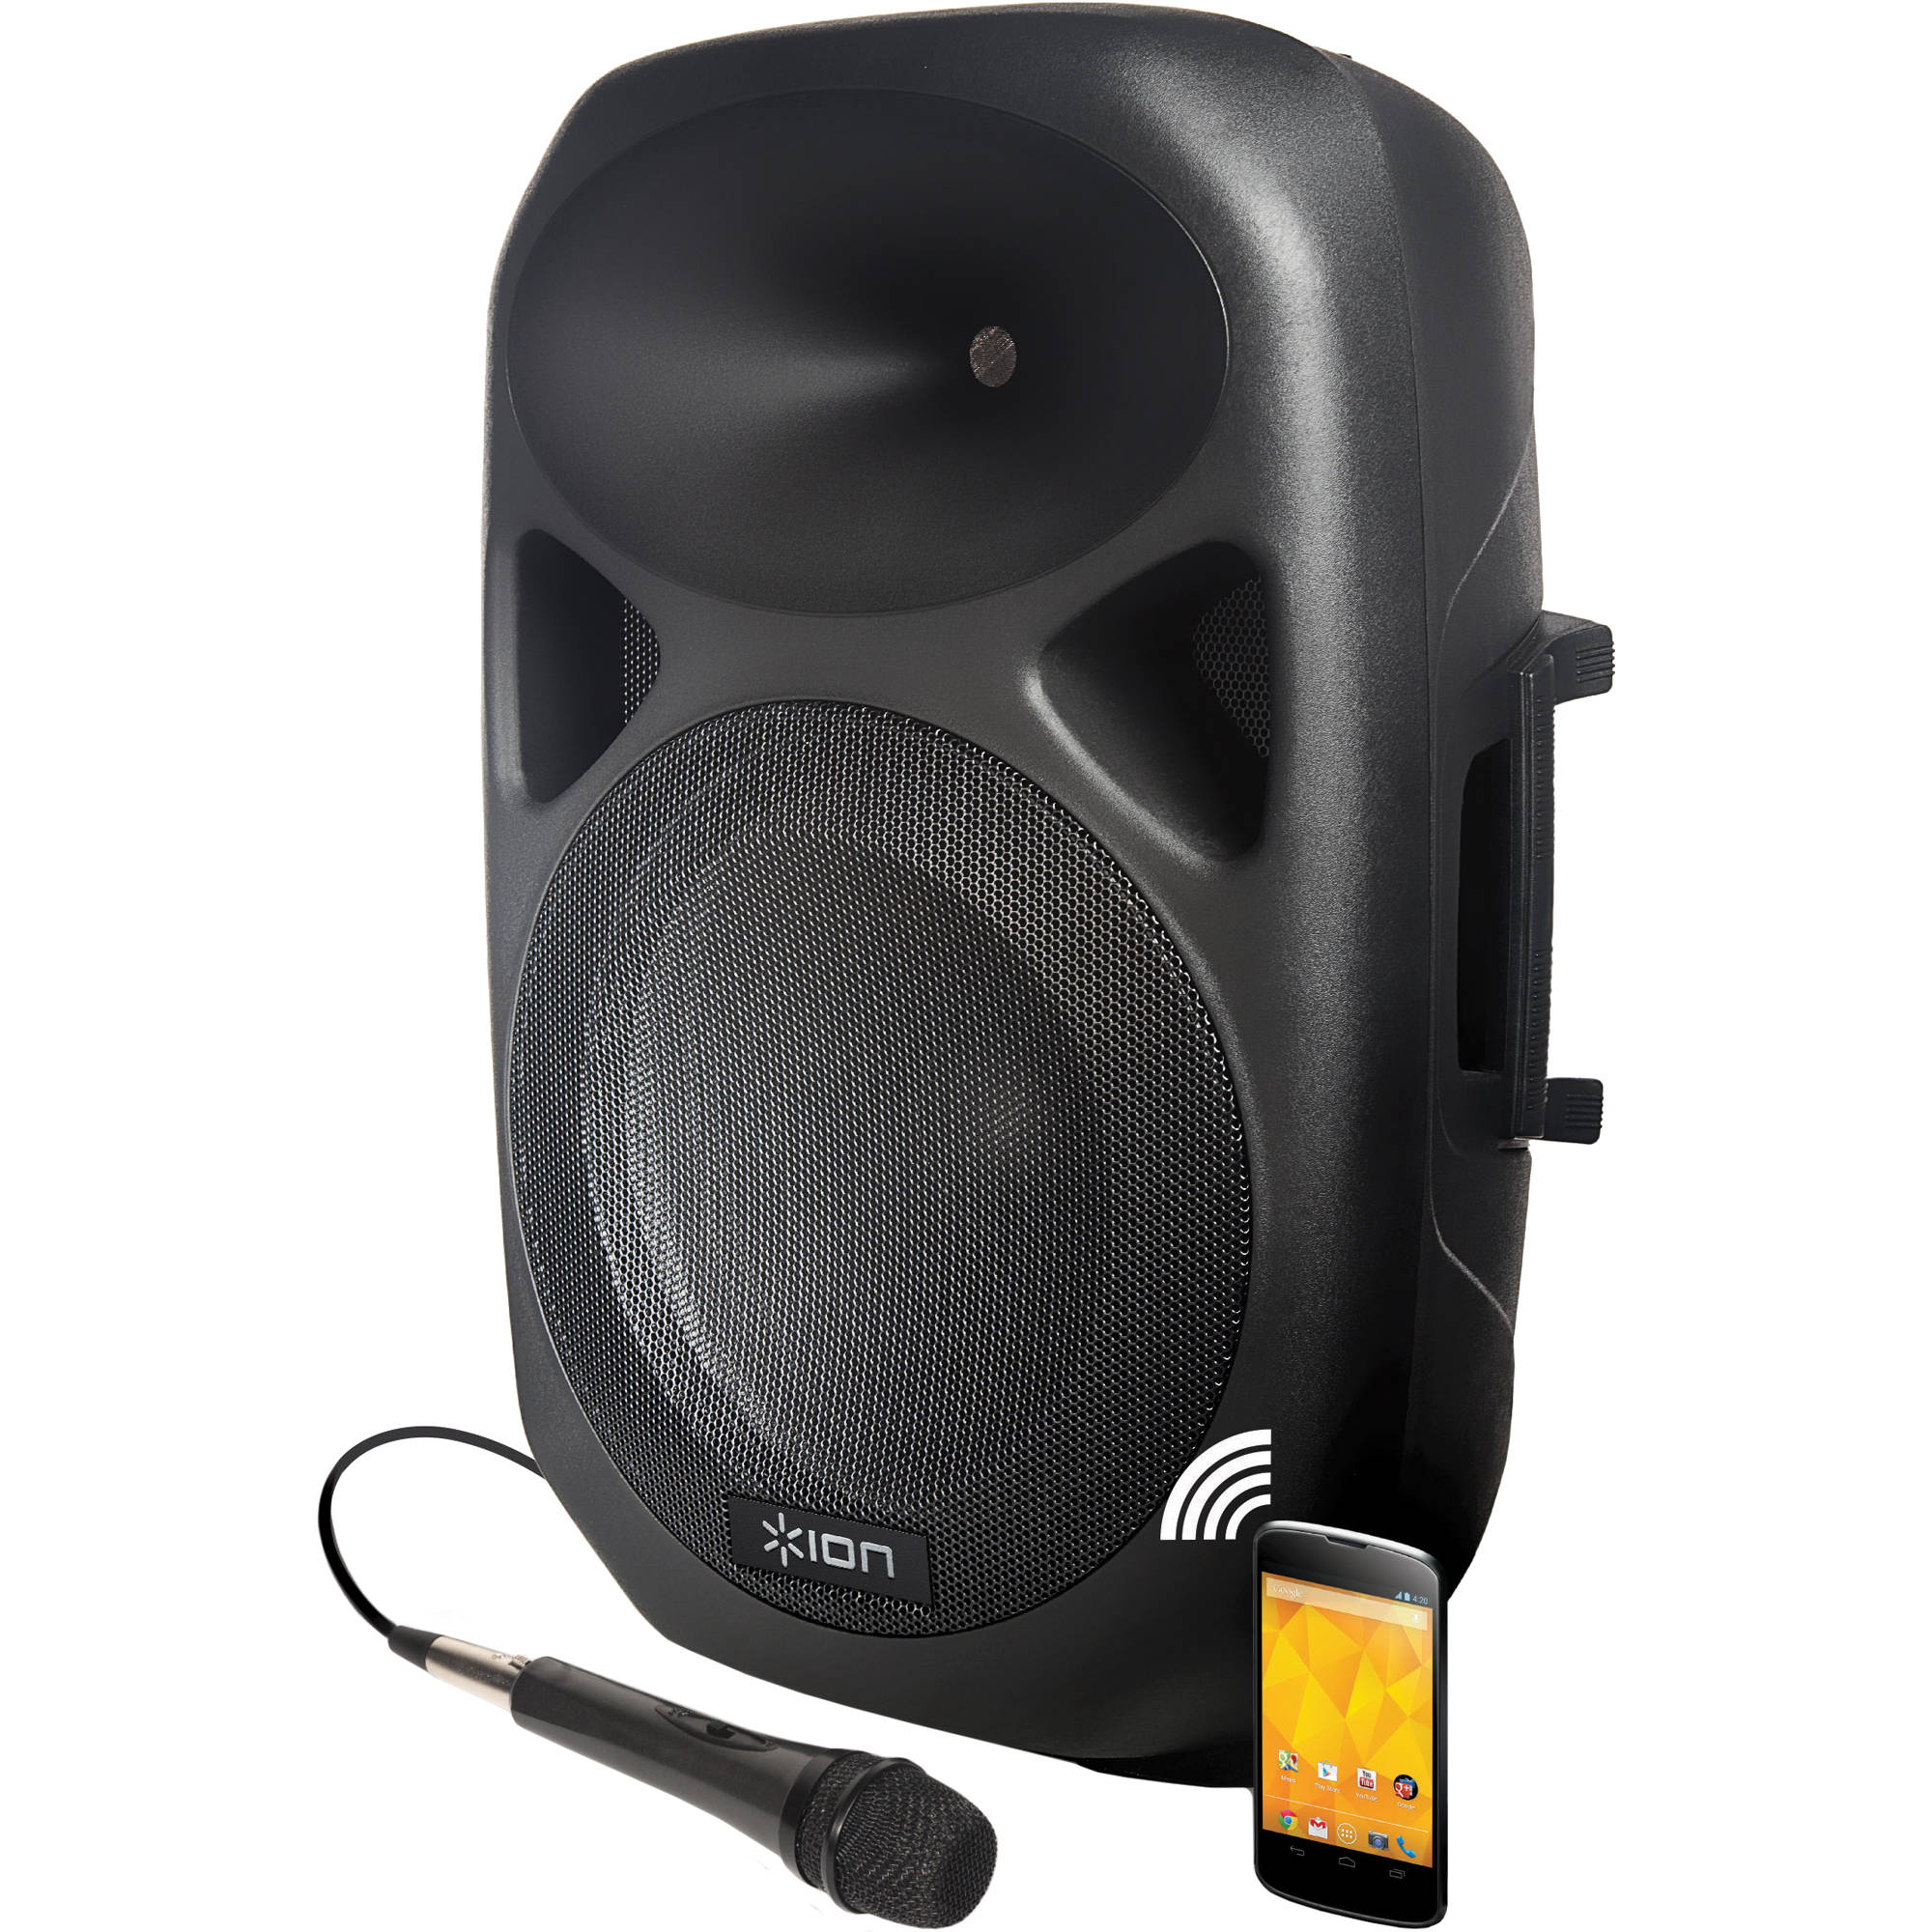 heroisk cafeteria talent ION Bluetooth Speaker System - American Party RentalAmerican Party Rental